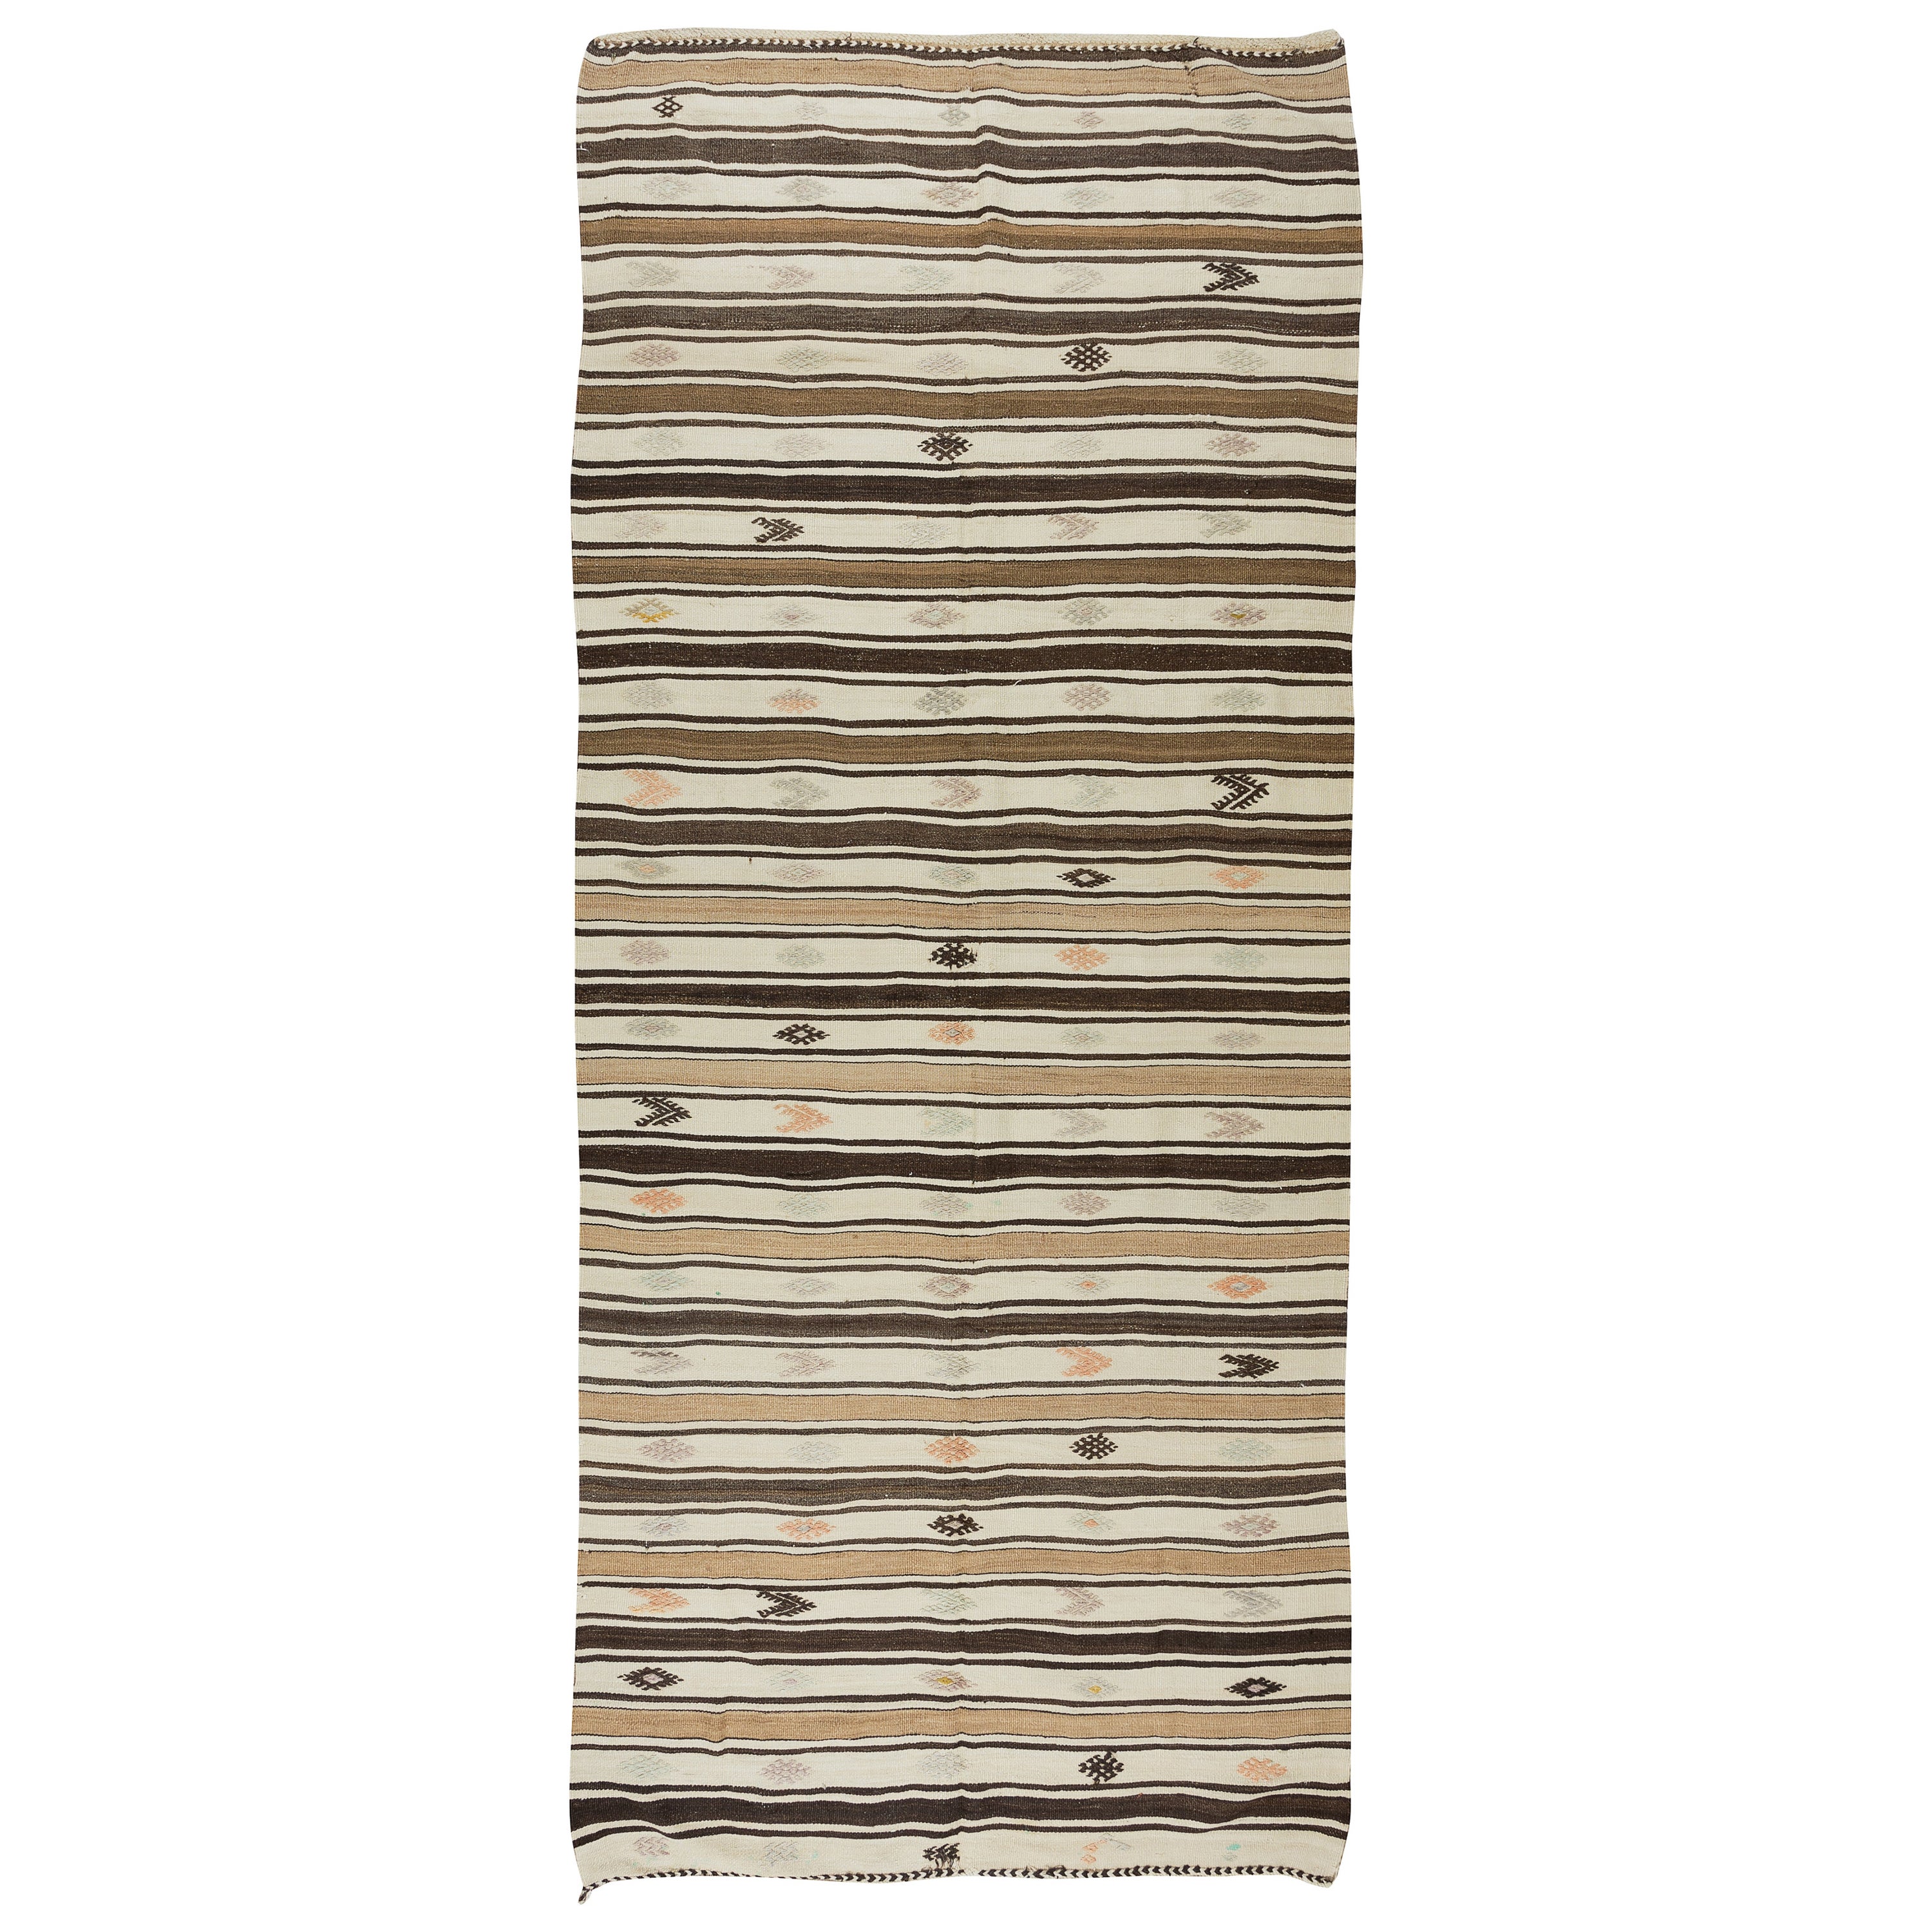 4.8x11.5 Ft Vintage Striped Hand Woven Turkish Wool Kilim Runner, Flat-Weave Rug For Sale